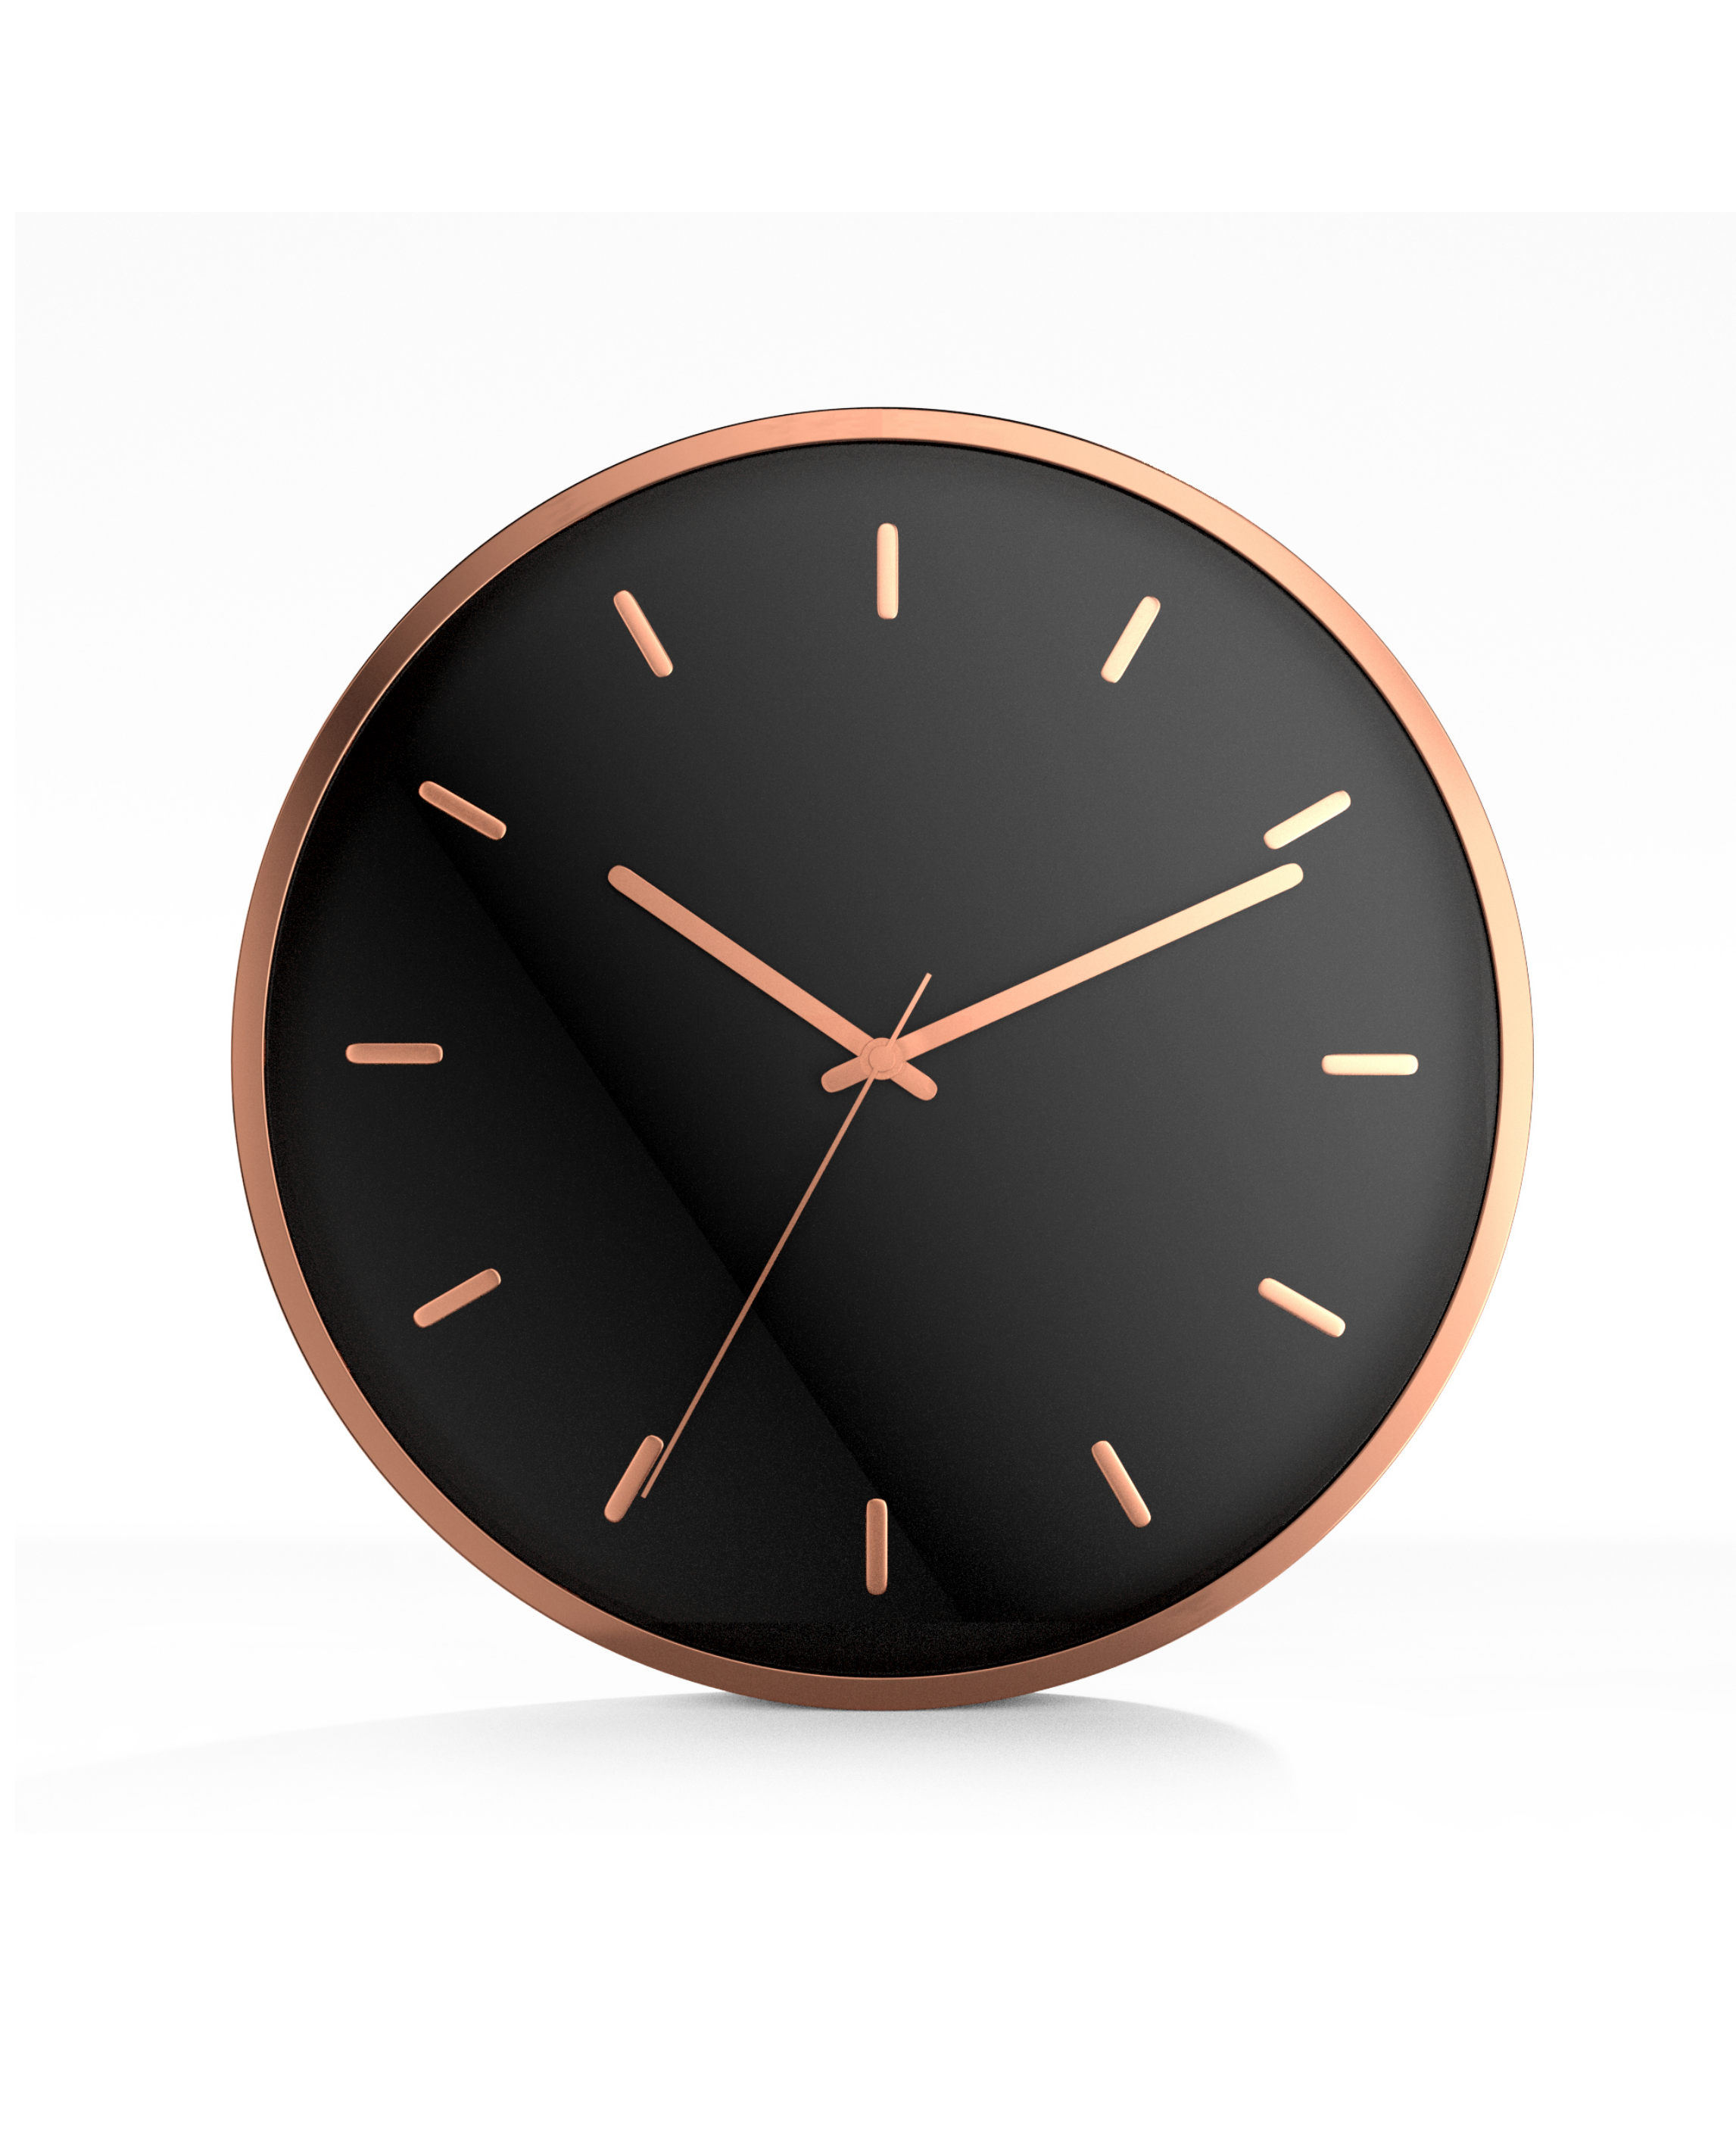 Driini Modern Mid Century Desk and Table Analog Clock (Black Rose Gold) -  Battery Operated with Silent Sweep Movement – Small Square Desktop Clocks